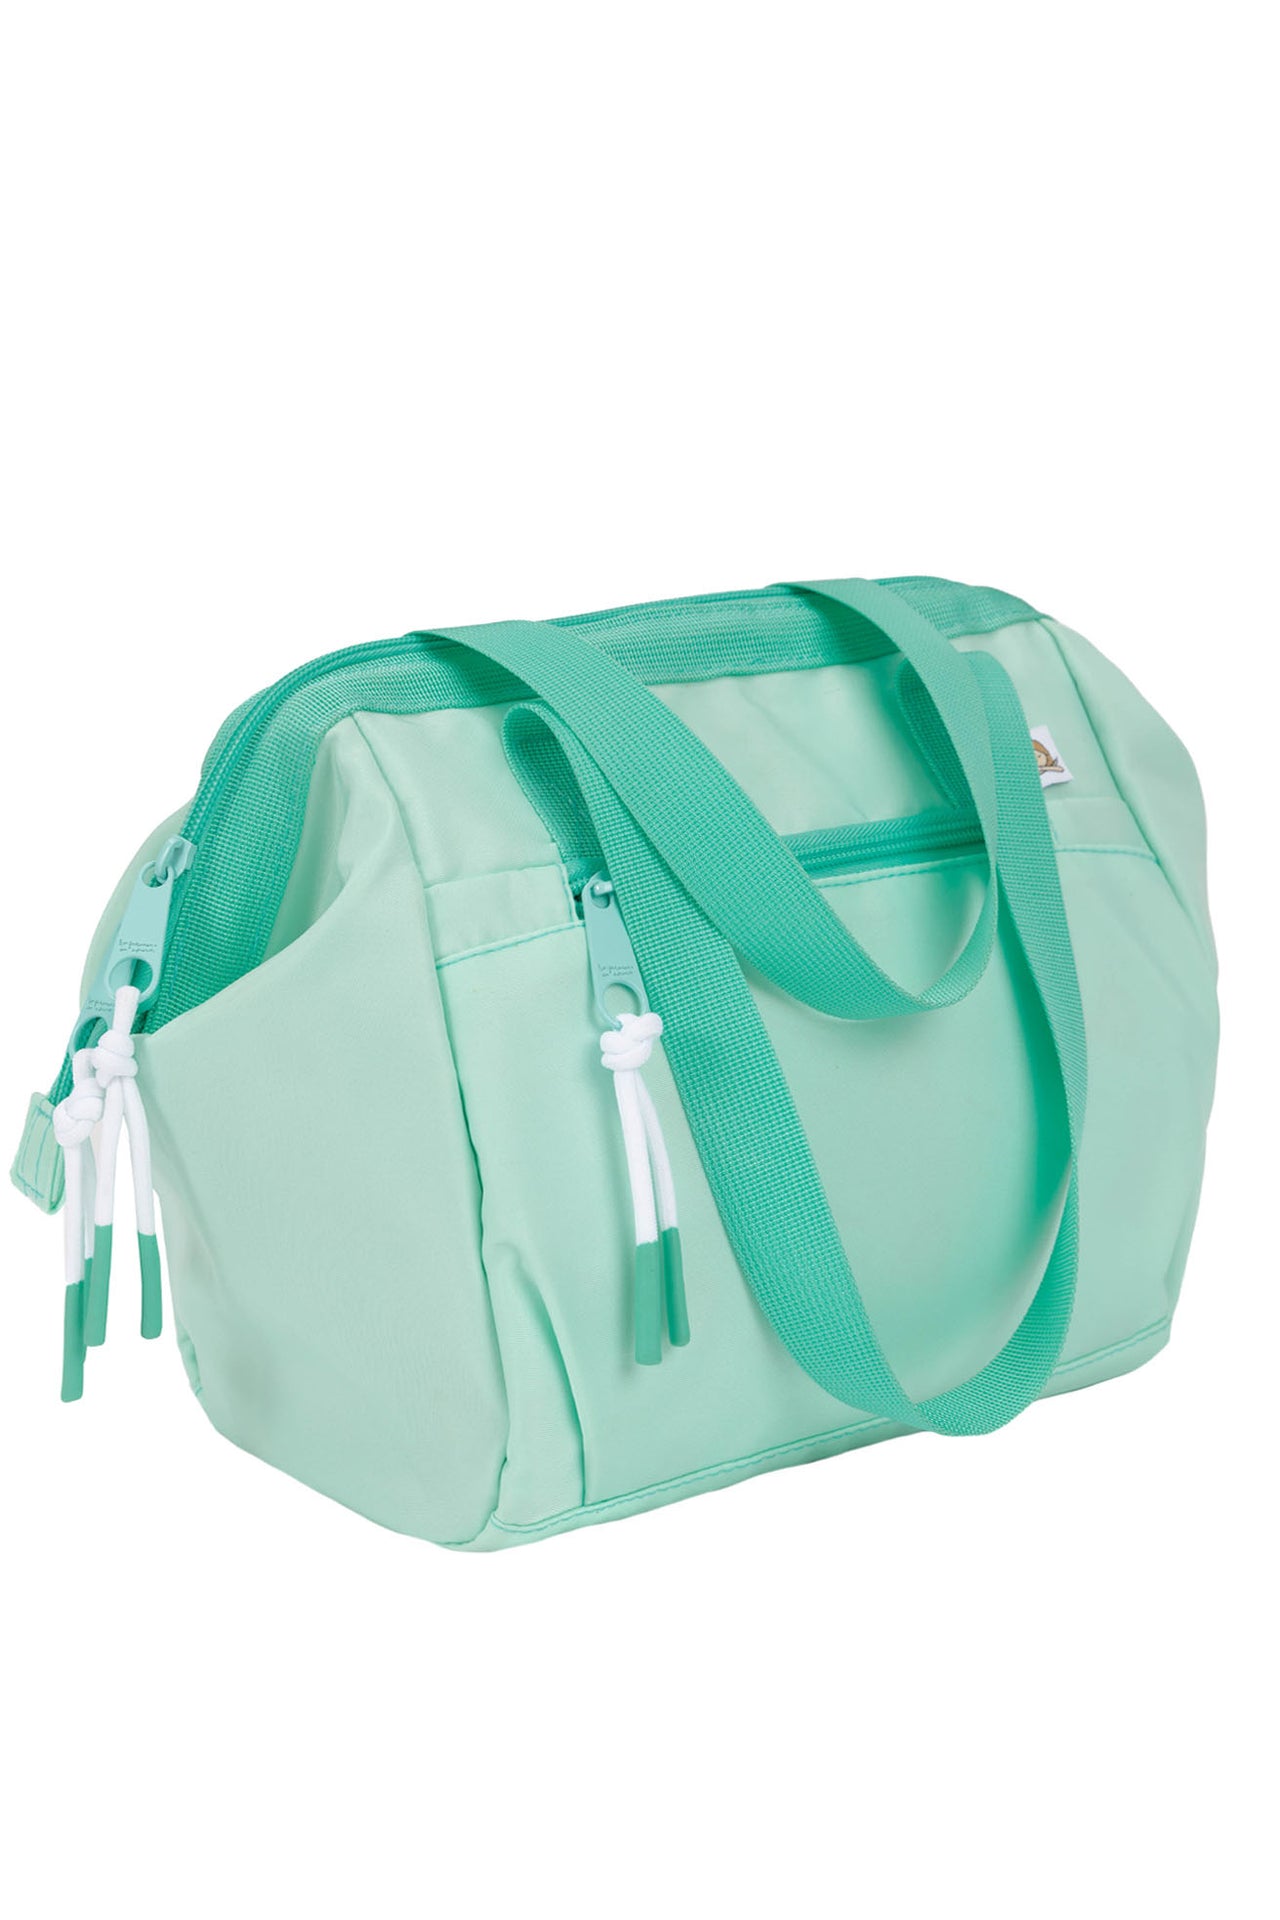 LUNCH BAG WITH HANDLES AQUAMARINE - SOFT COLORS